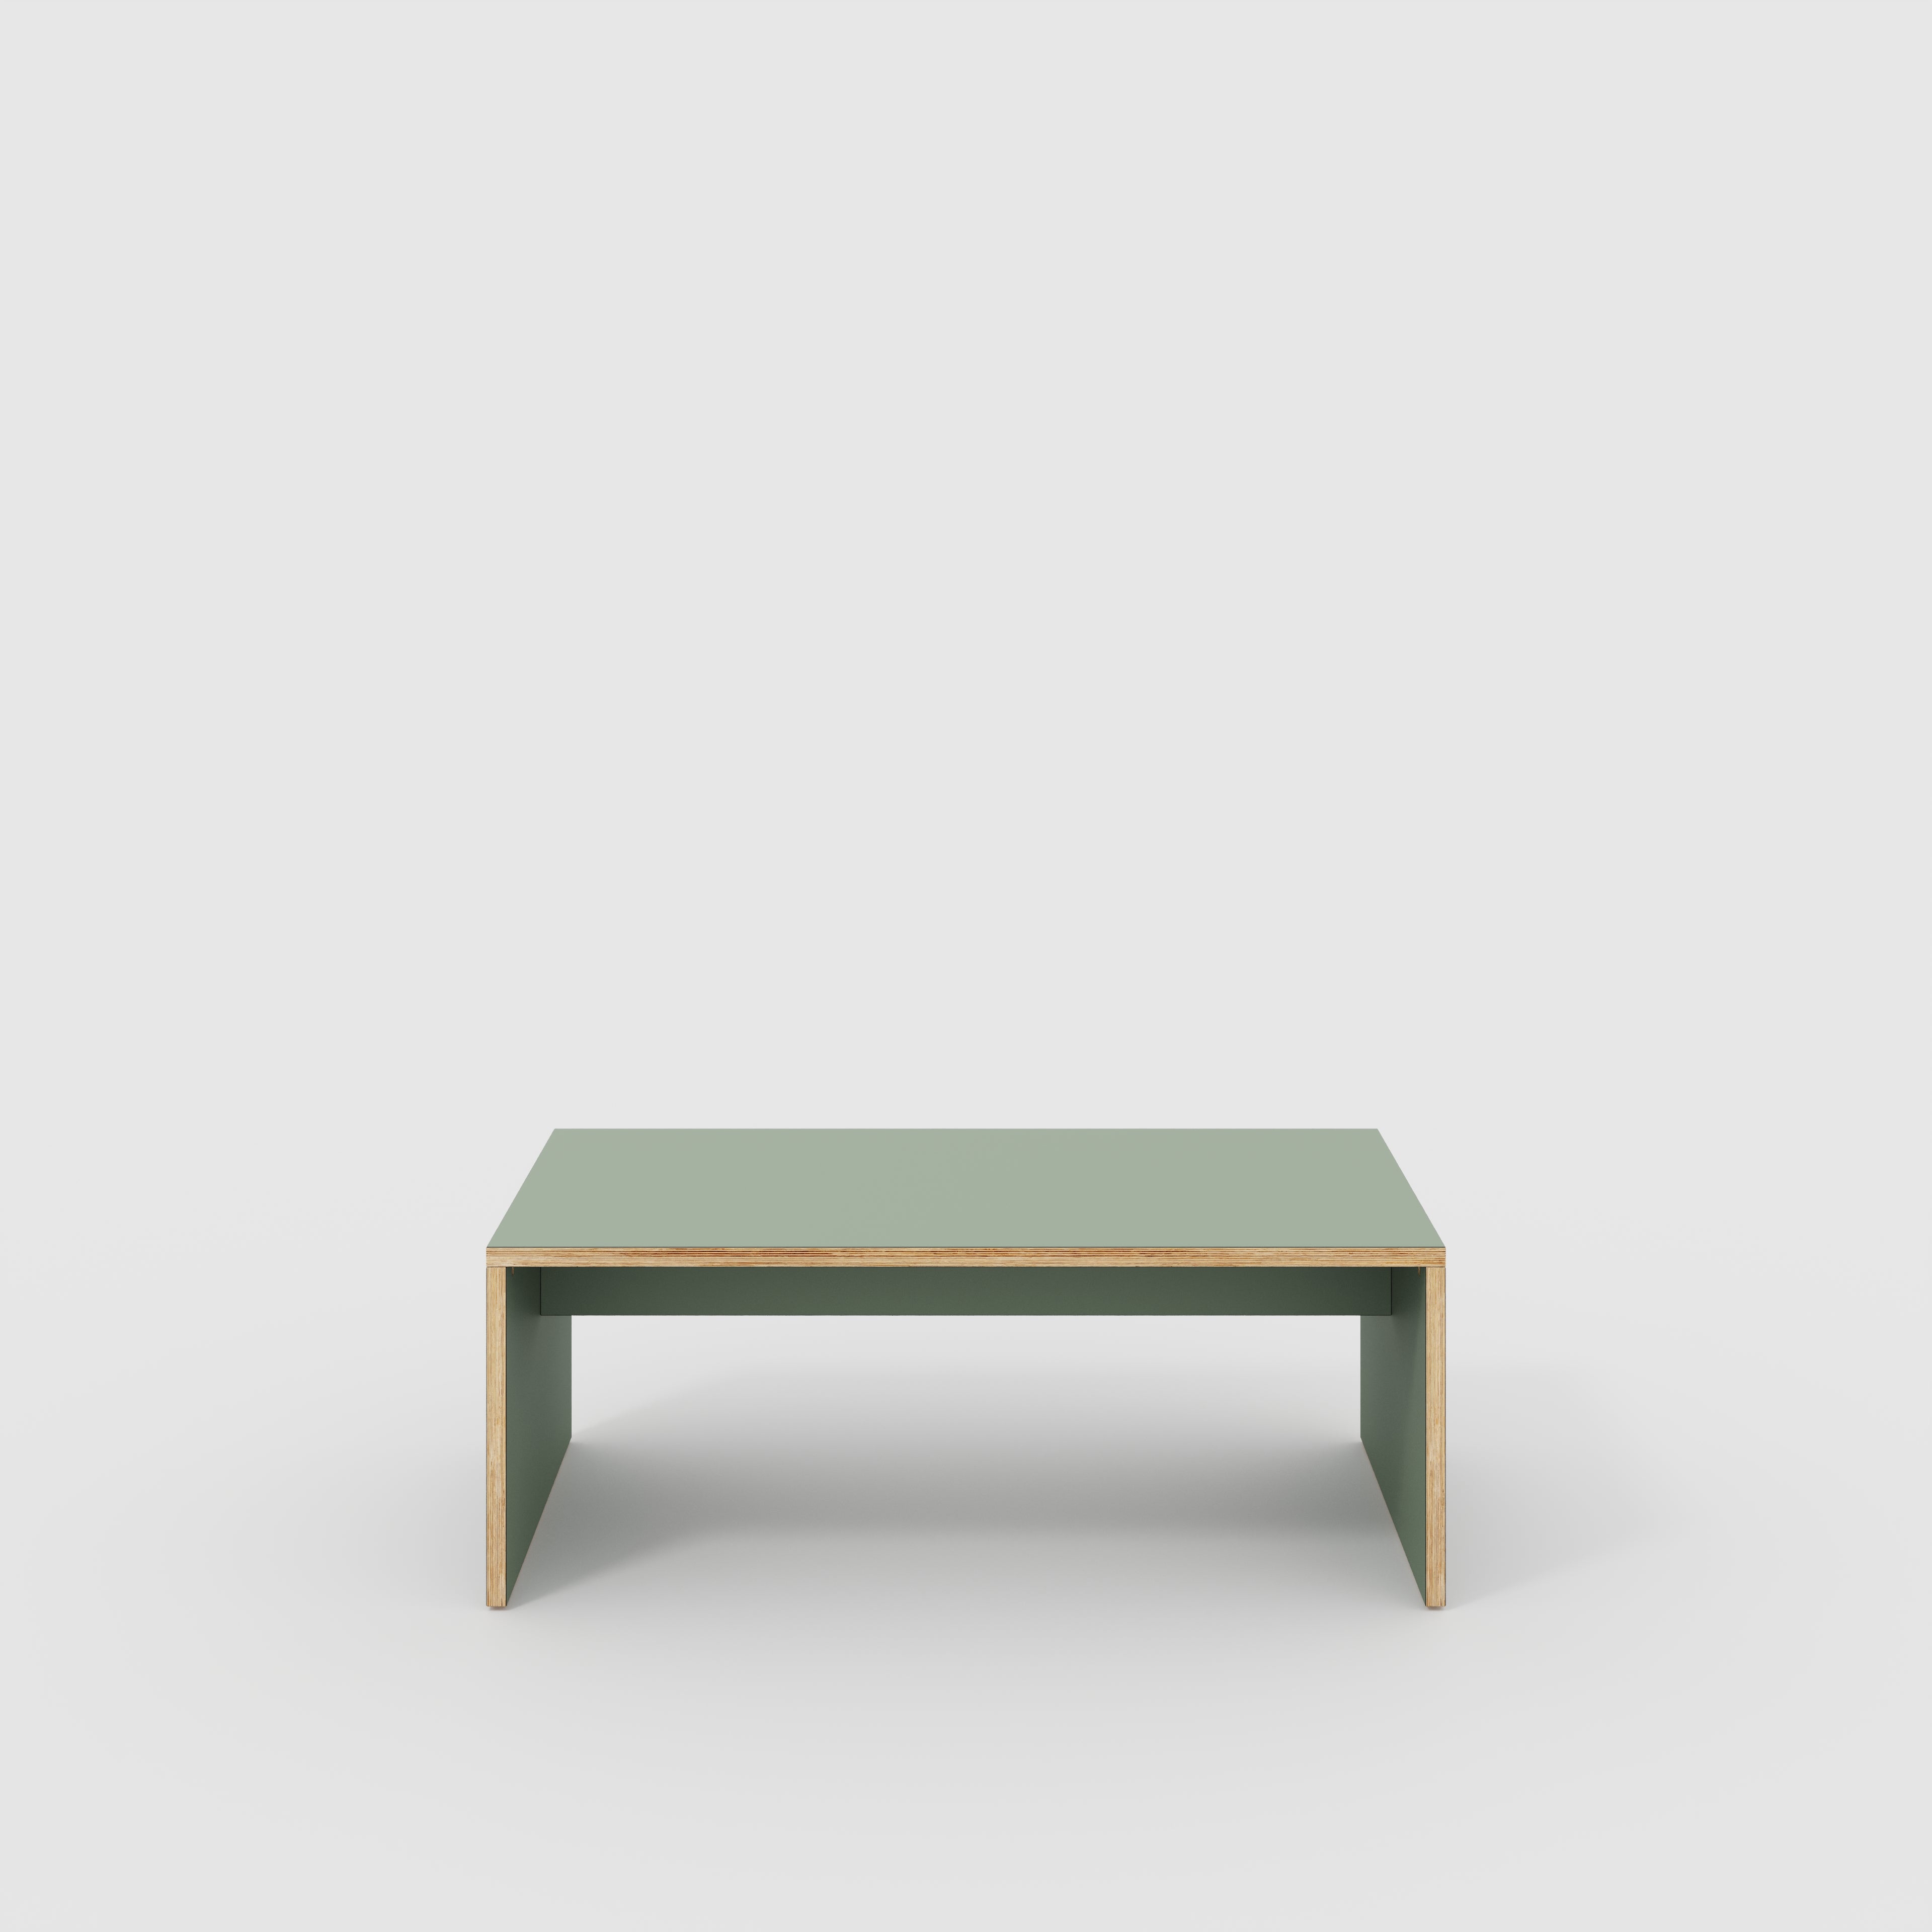 Coffee Table with Solid Sides - Formica Green Slate - 1200(w) x 600(d) x 450(h)